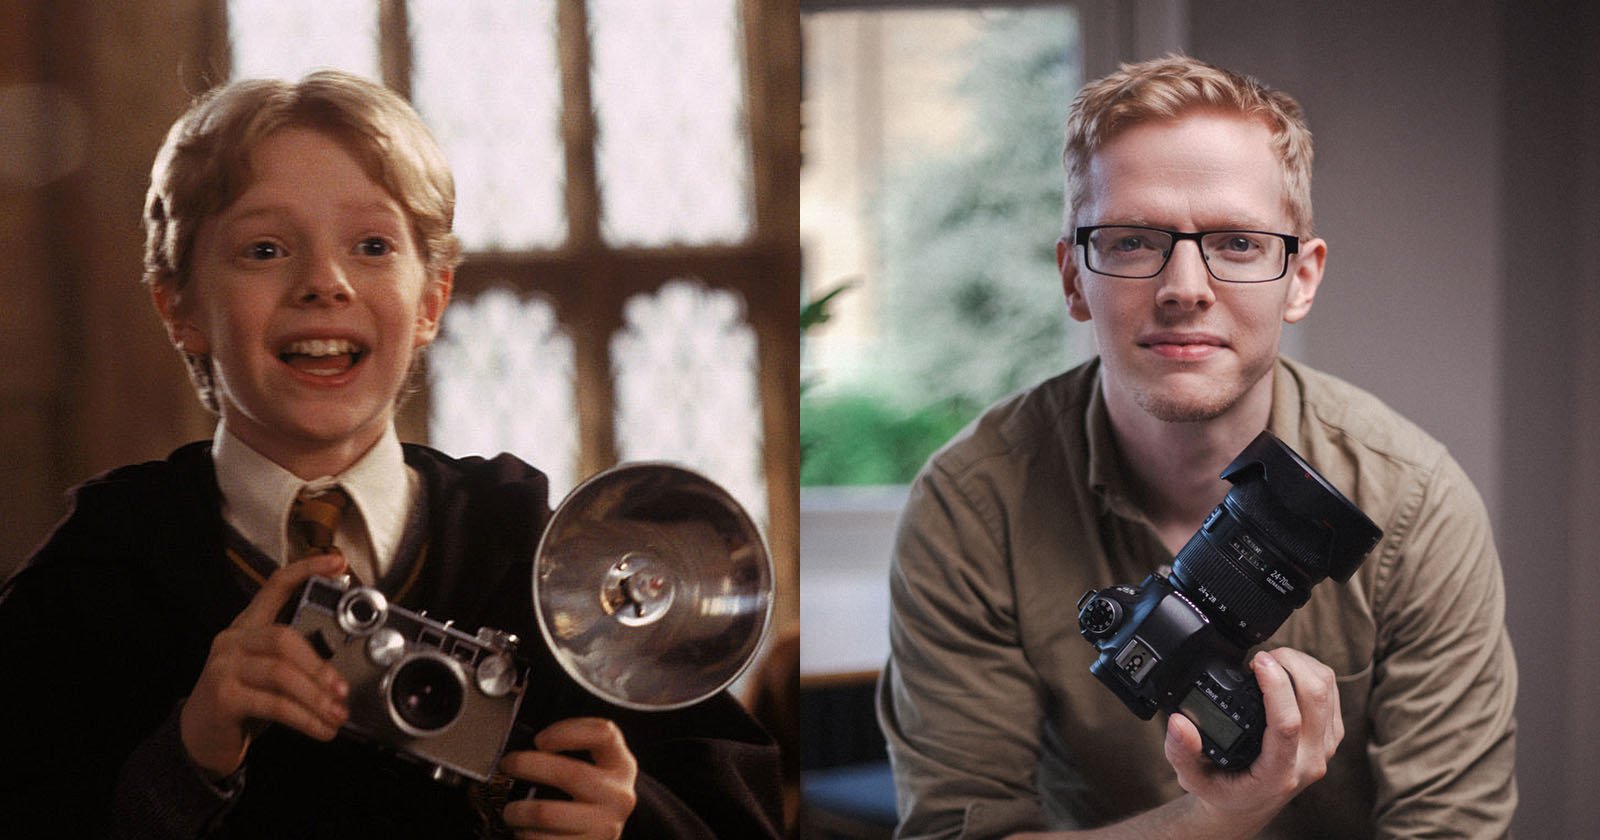 Colin Creevey from 'Harry Potter' is Now a Real-Life Pro ...